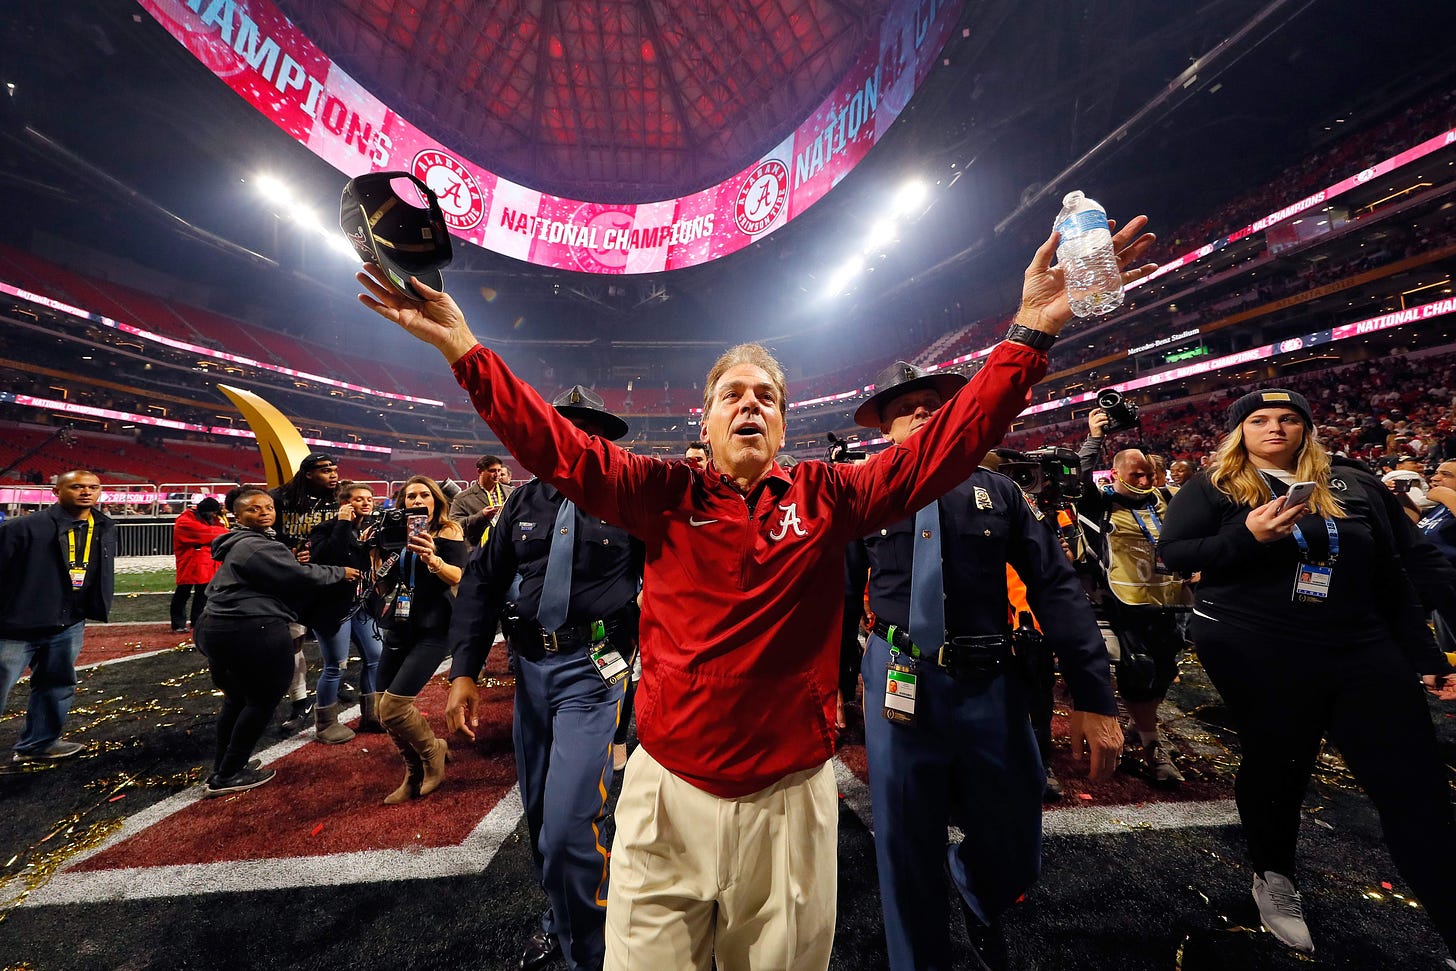 Was this Nick Saban's finest moment?